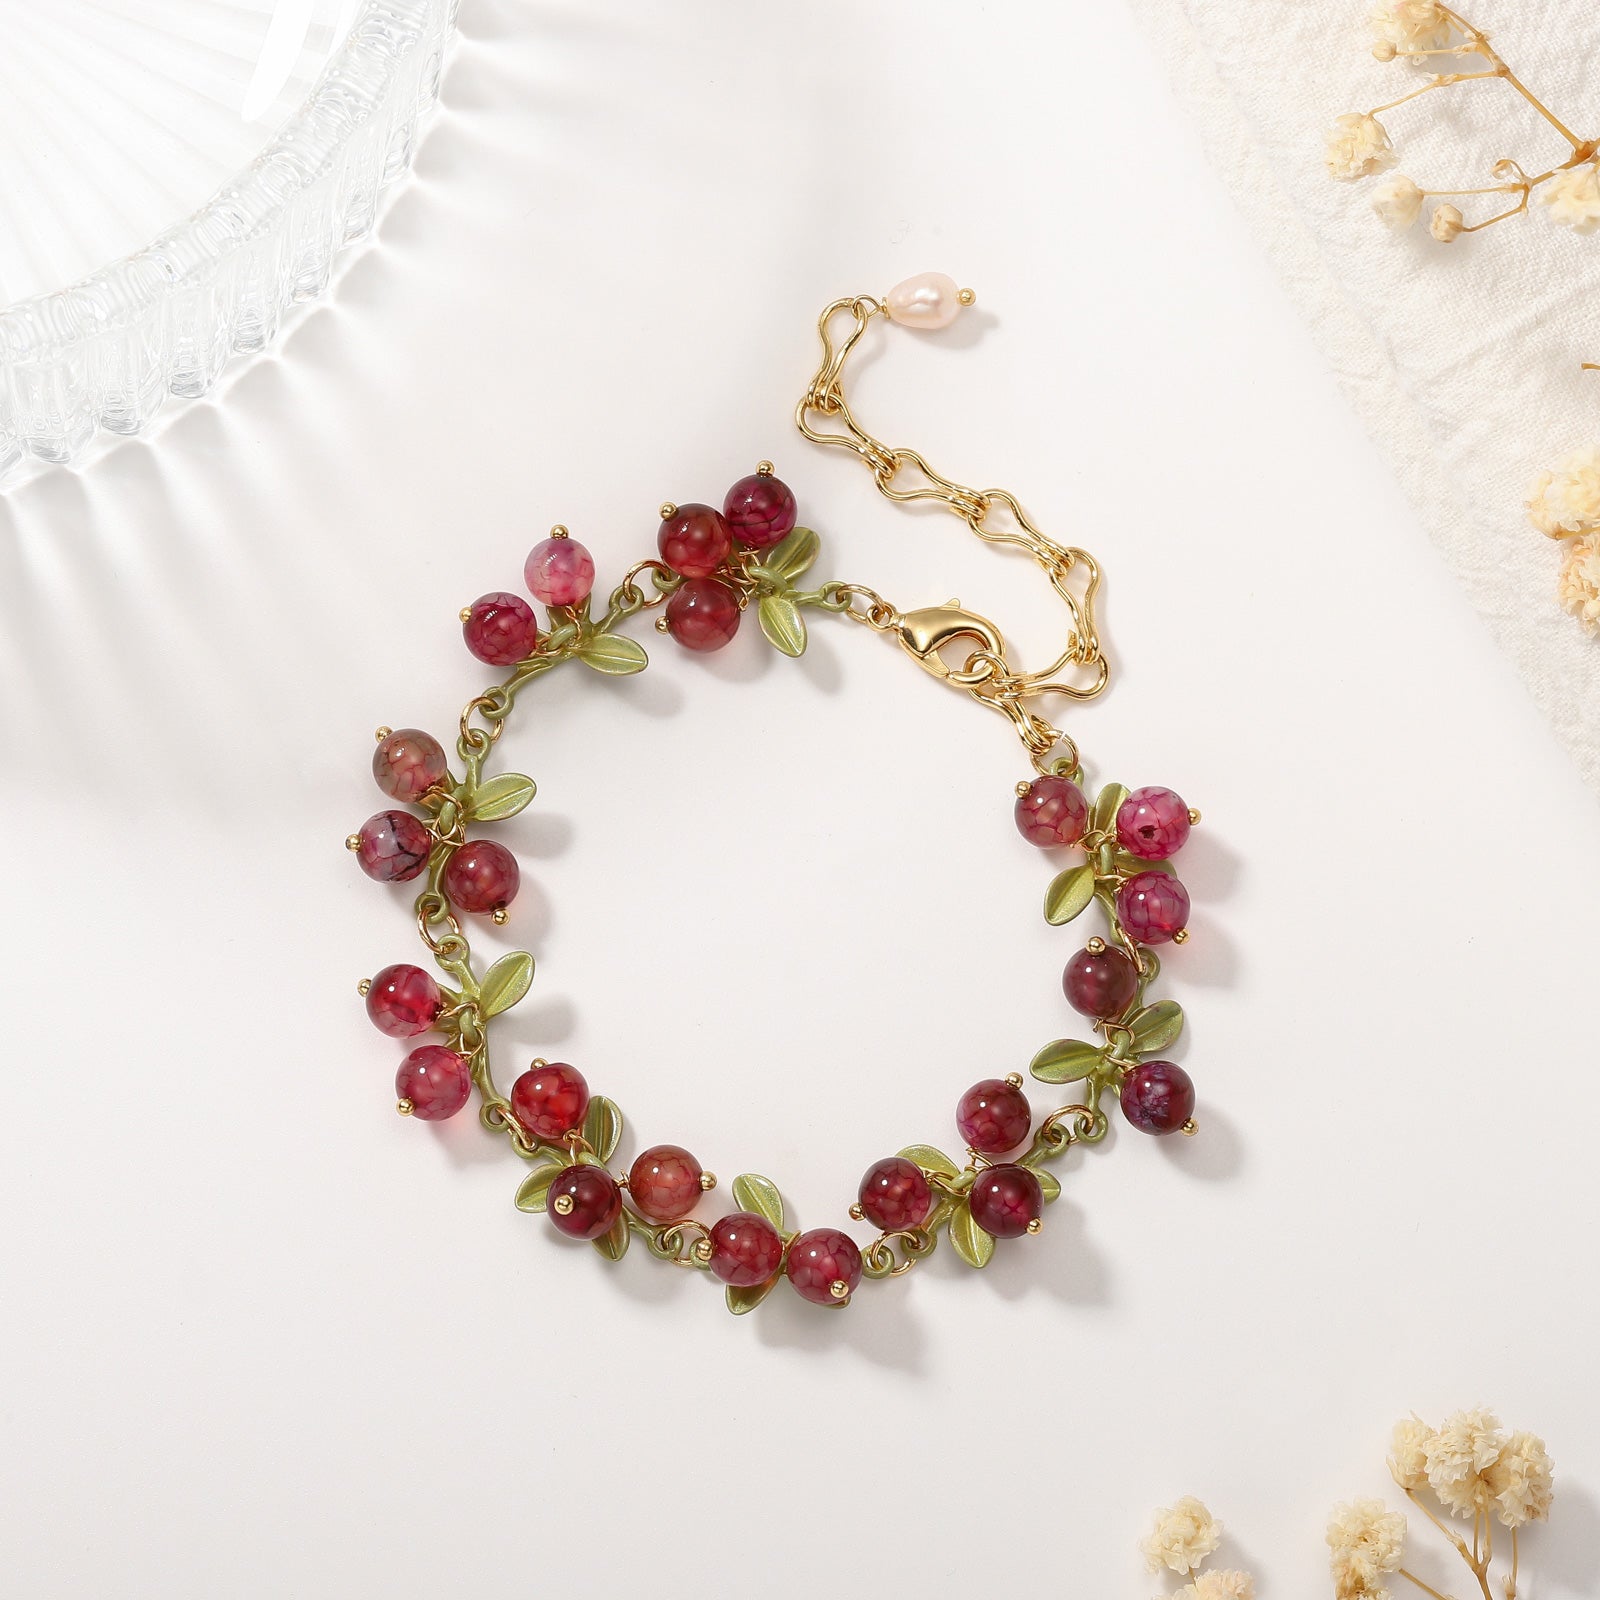 Cranberry Orchard Jewelry